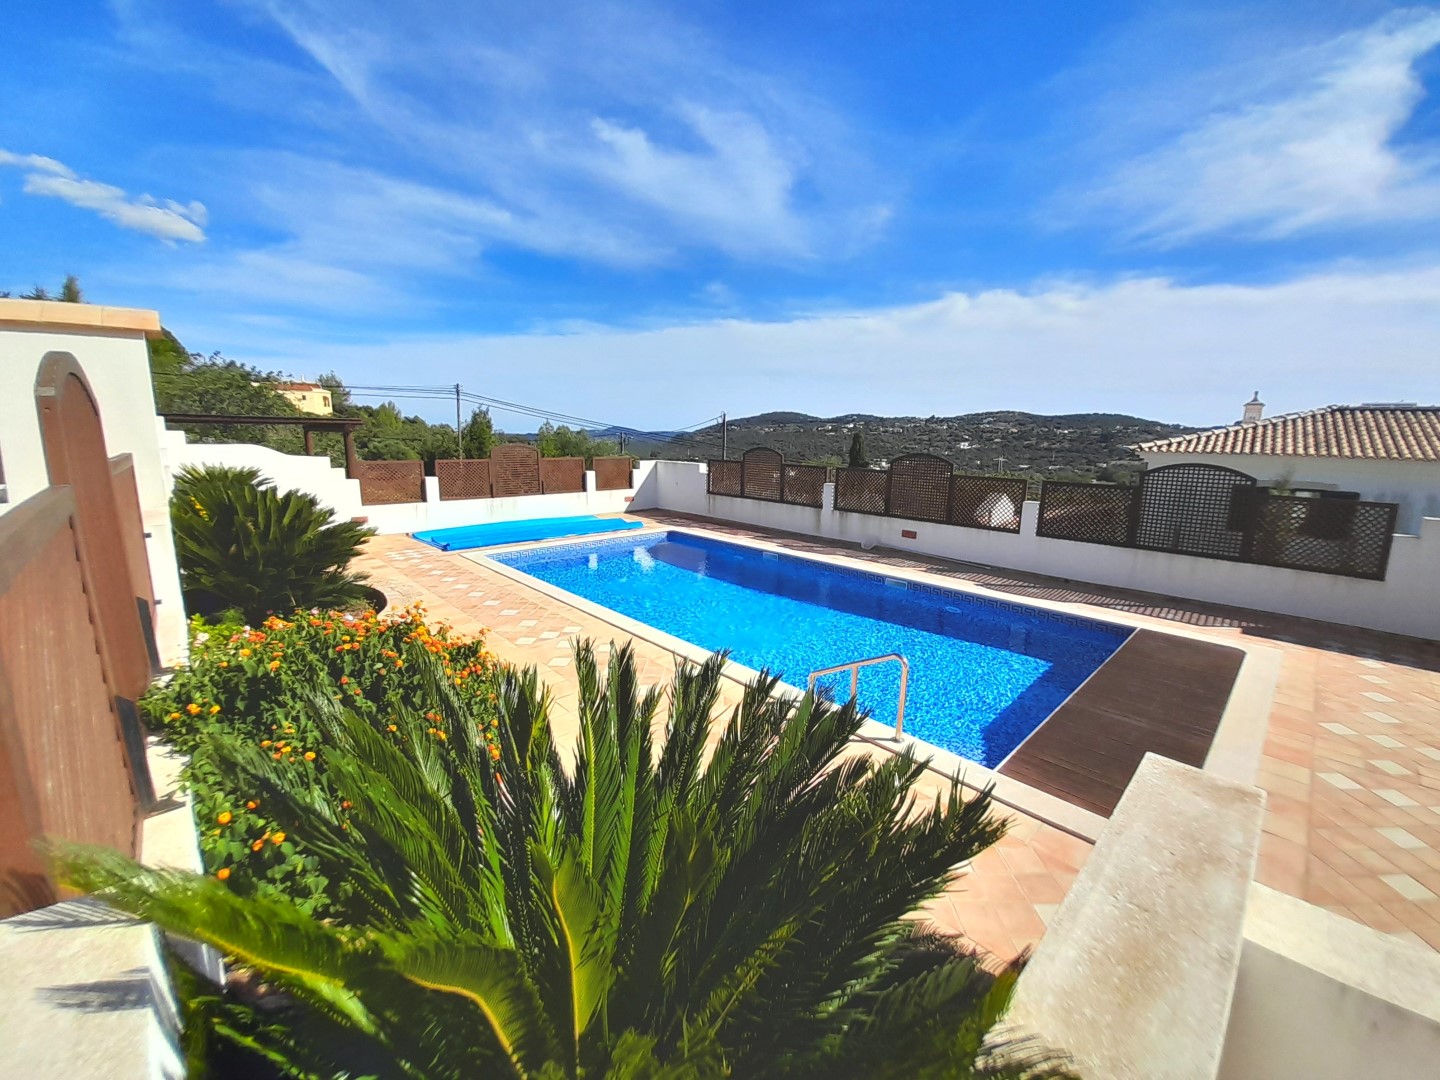 New Listing! Long Term Rental – V3 Villa, 2 + 1 Bedroom Ensuite, w/Swimming Pool and South Facing Magnificent Views – Country Side Living, Between Loulé and São Brás, Algarve – Portugal